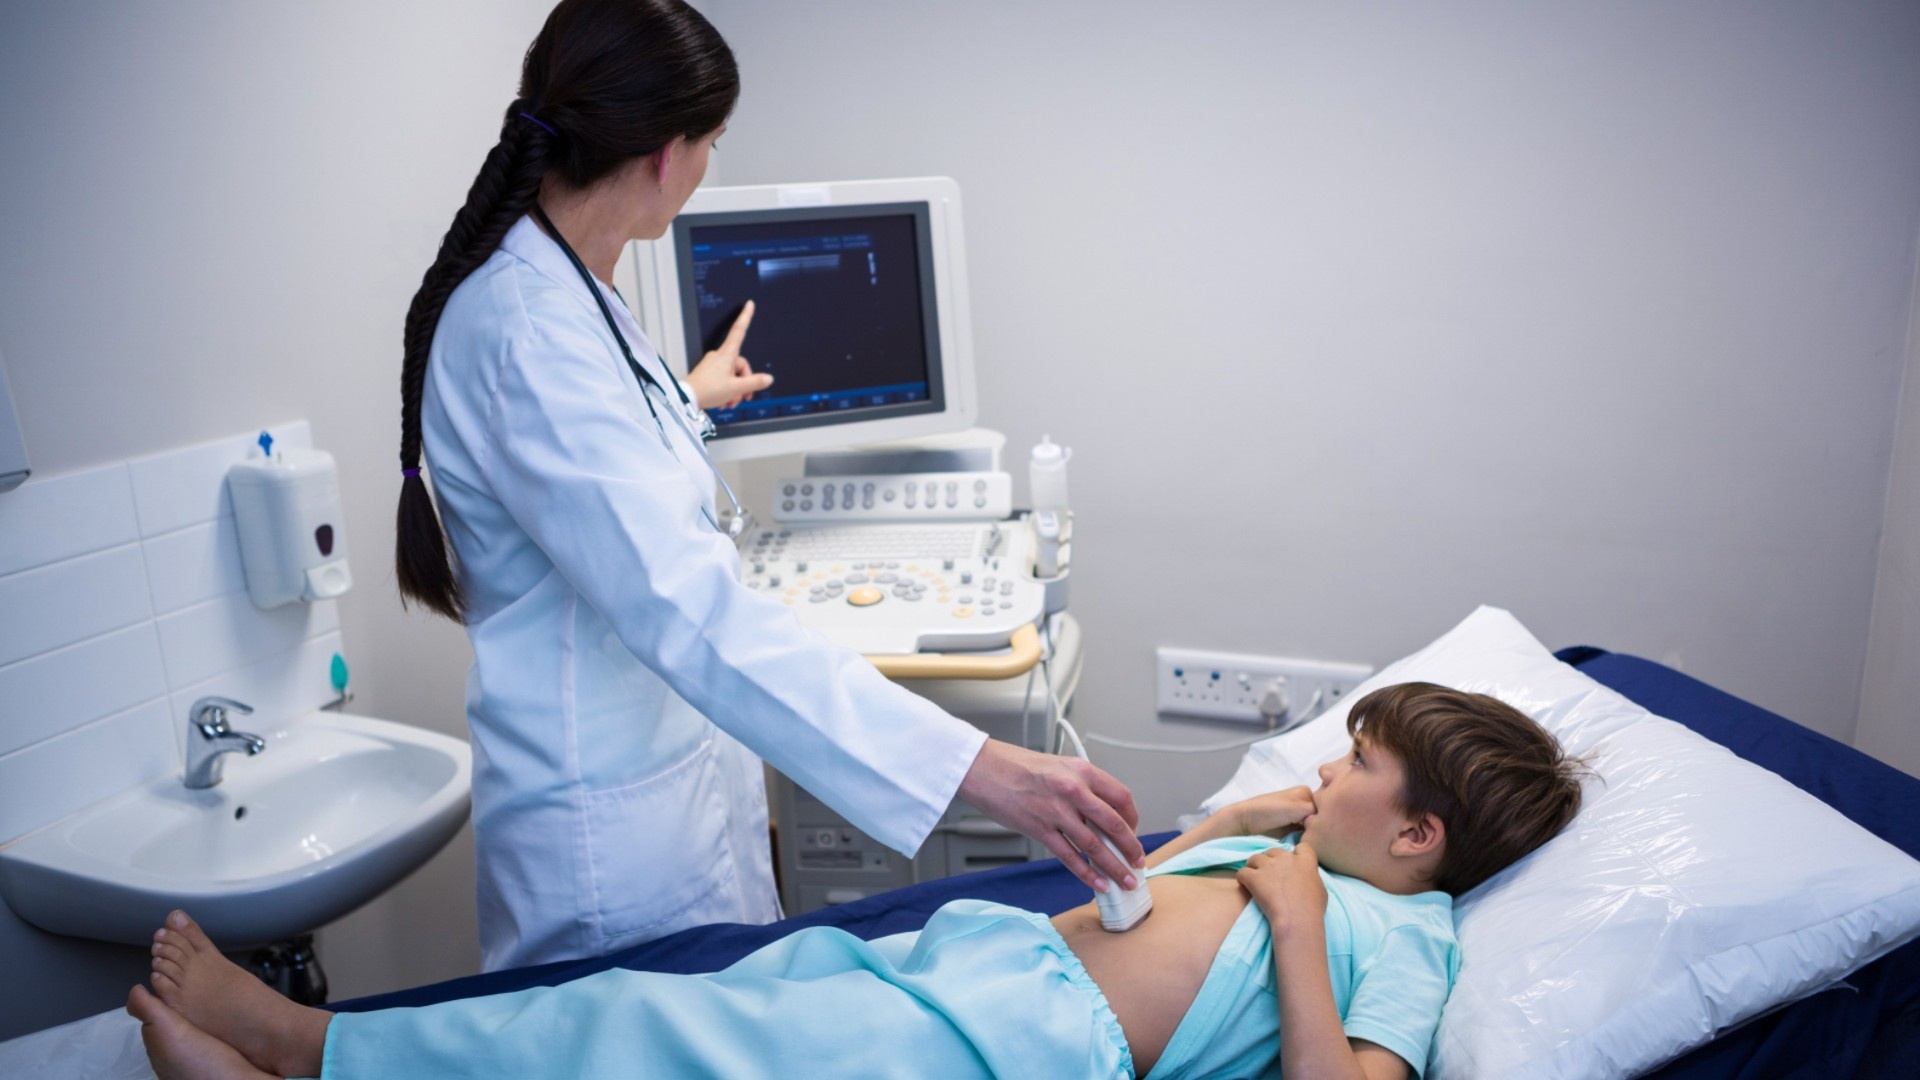 16 Extraordinary Facts About Diagnostic Medical Sonographer - Facts.net